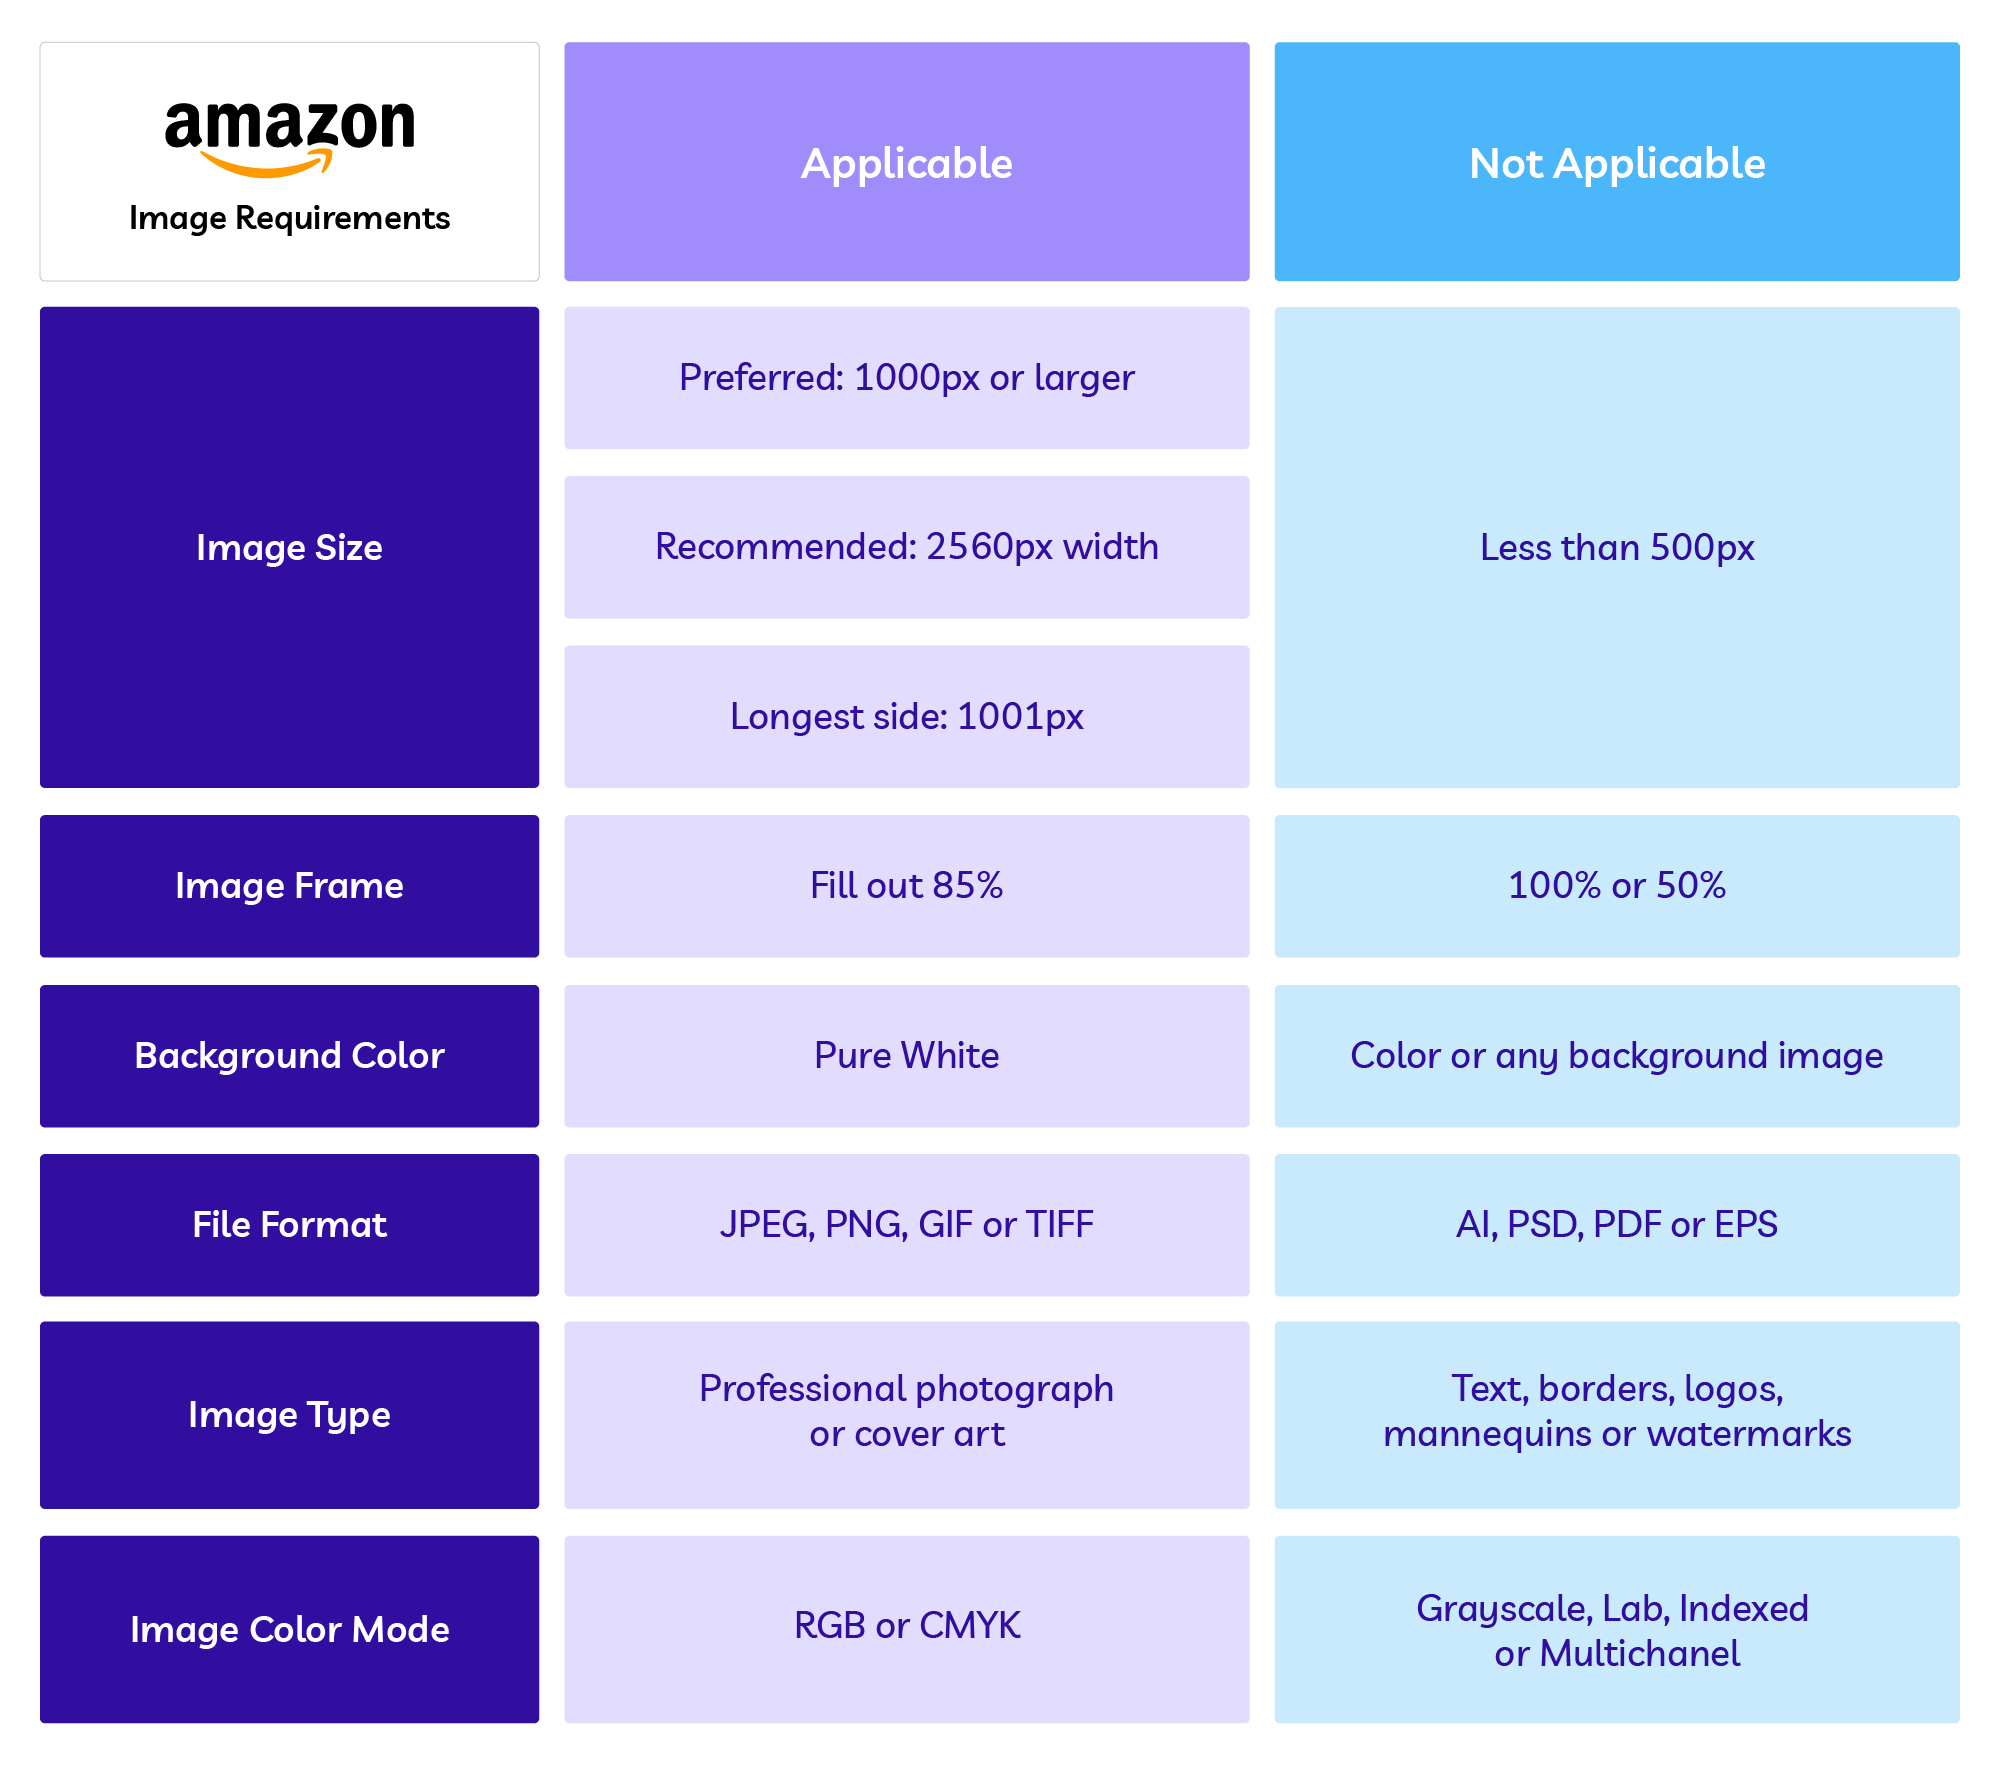 Chart showcasing Amazon image requirements for image size, frame, background color, file format, image type, and color mode